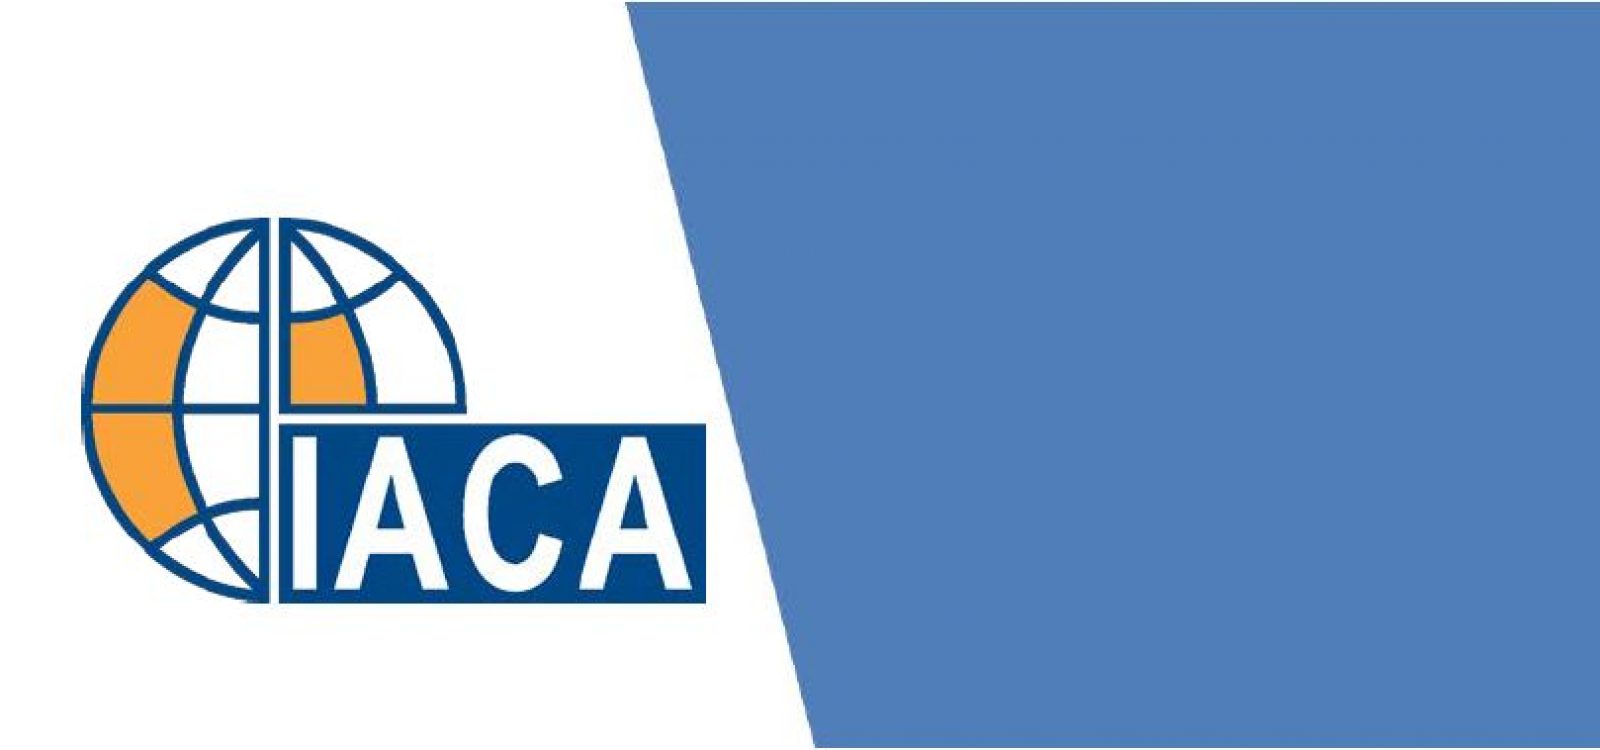 50 years of actuaries consulting globally – the history of IACA